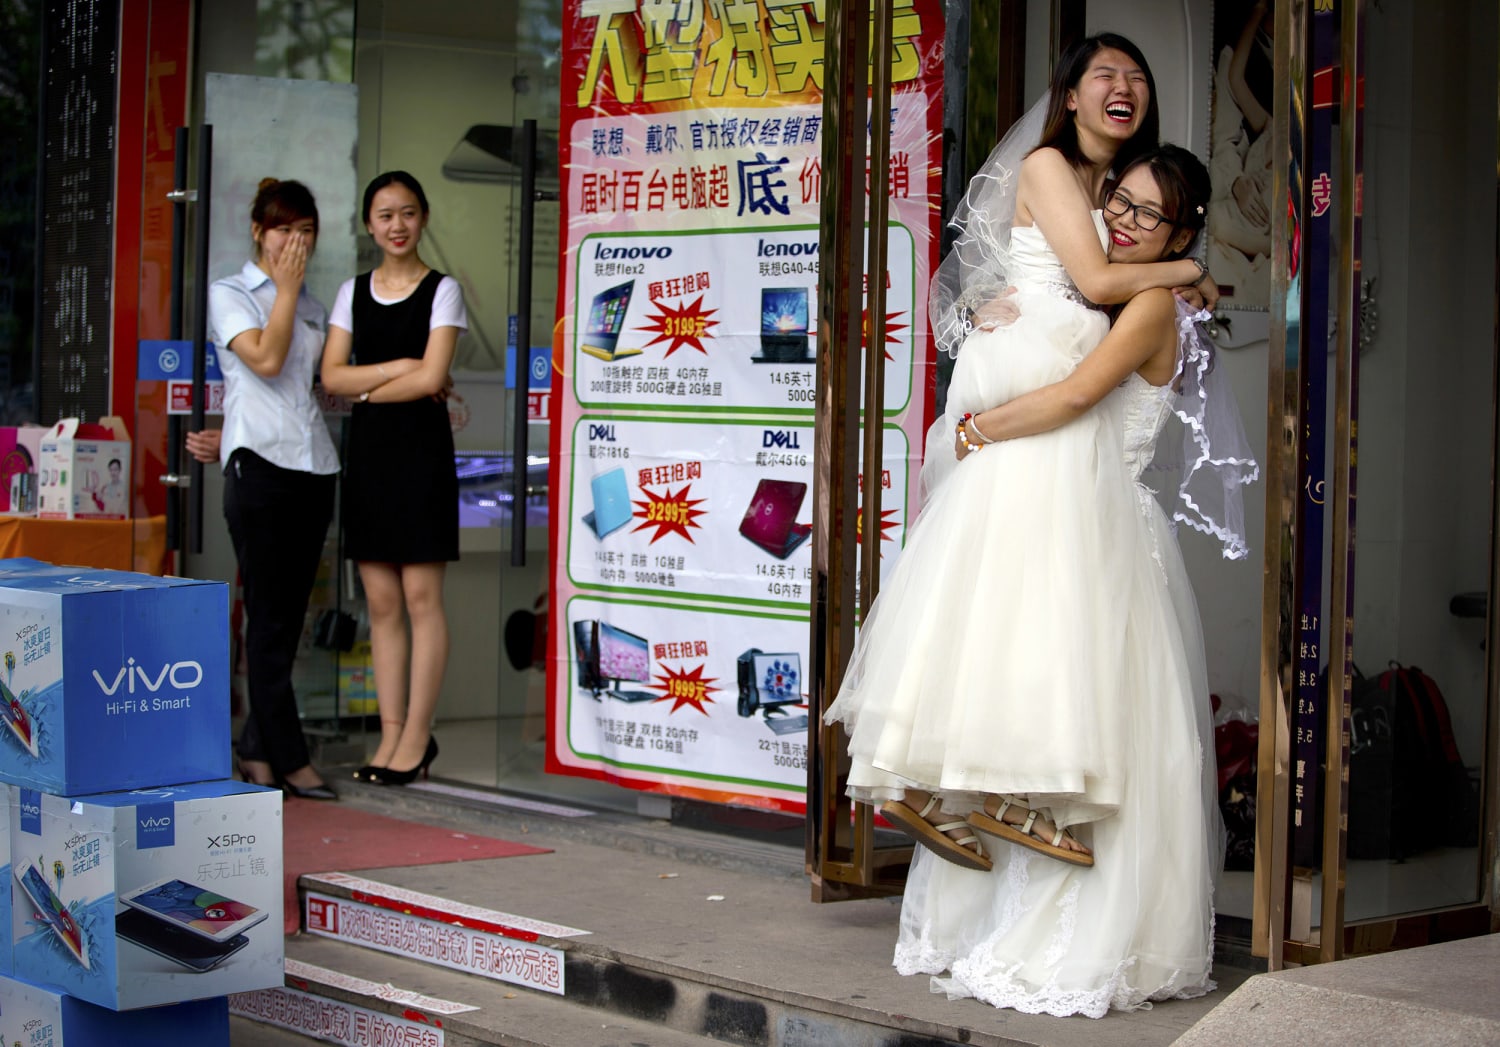 Why is China raising the prospect of same-sex marriage? picture